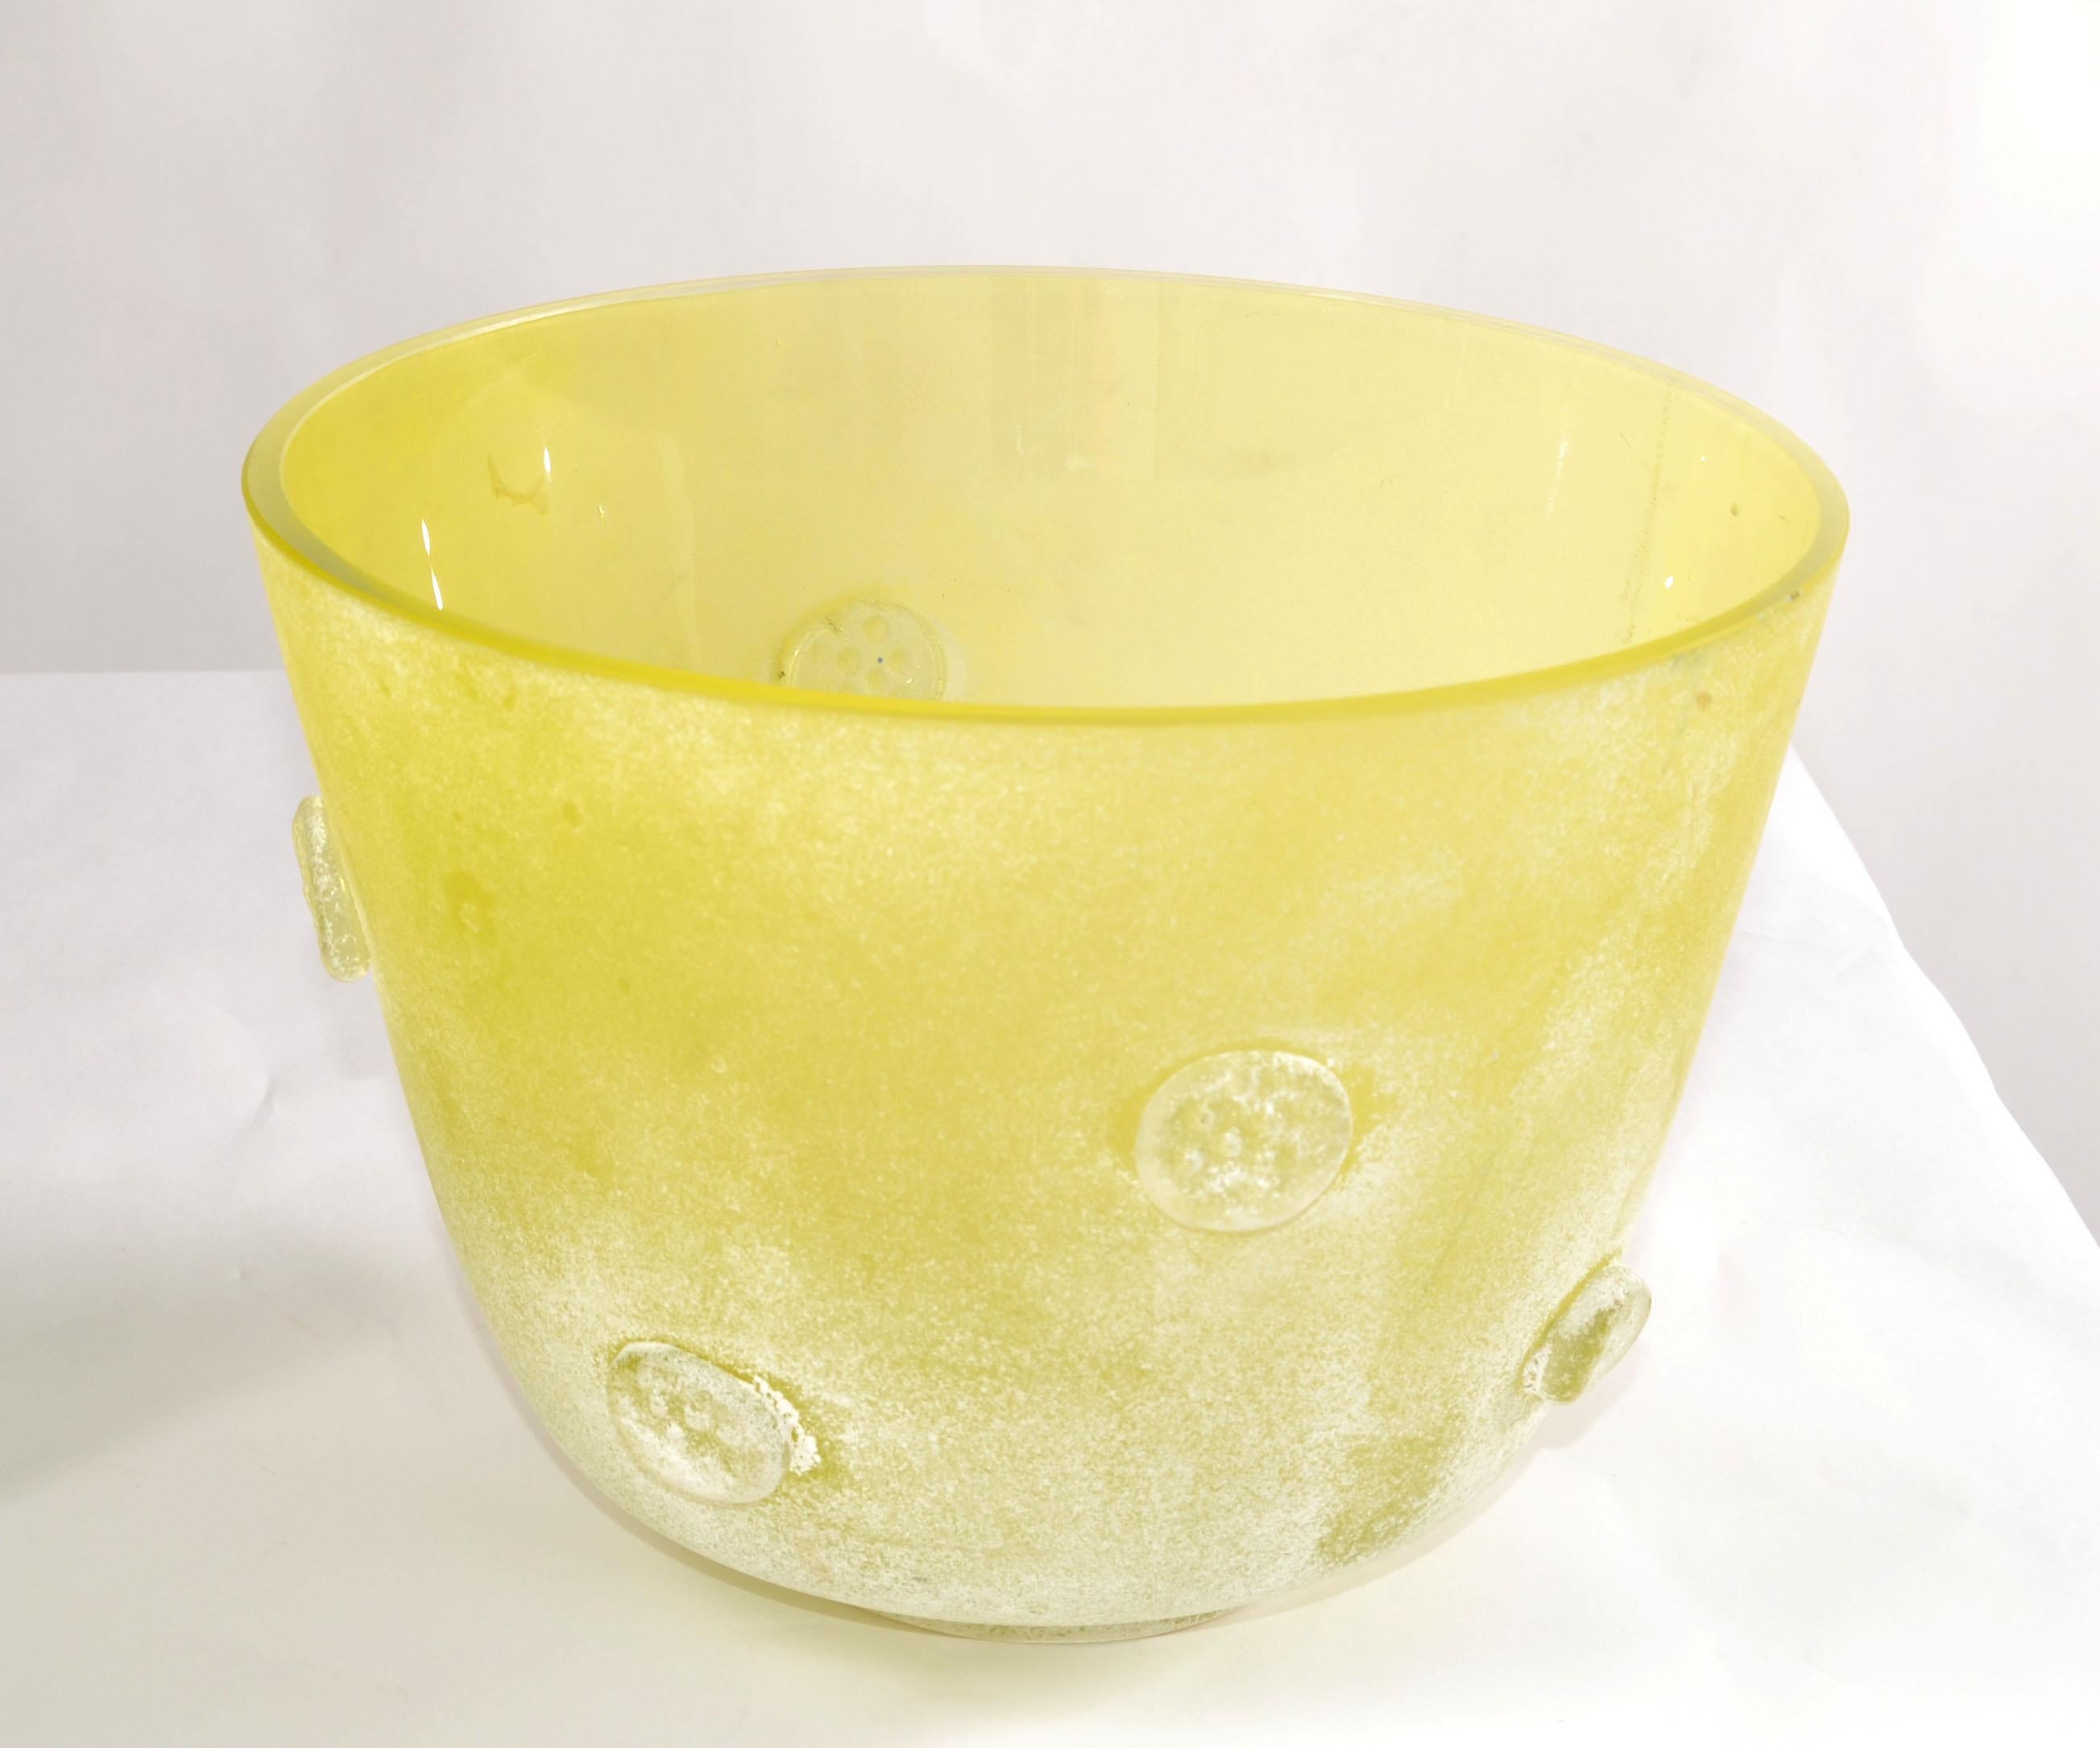 Archimede Seguso Italy Scavo Blown Murano Glass frosted white & Yellow Art Glass bowl, vessel, Centerpiece Mid-Century Modern made by Seguso Vetri d'Arte Italy circa in late 1970s.
No Markings.
In very good vintage condition, normal wear due to